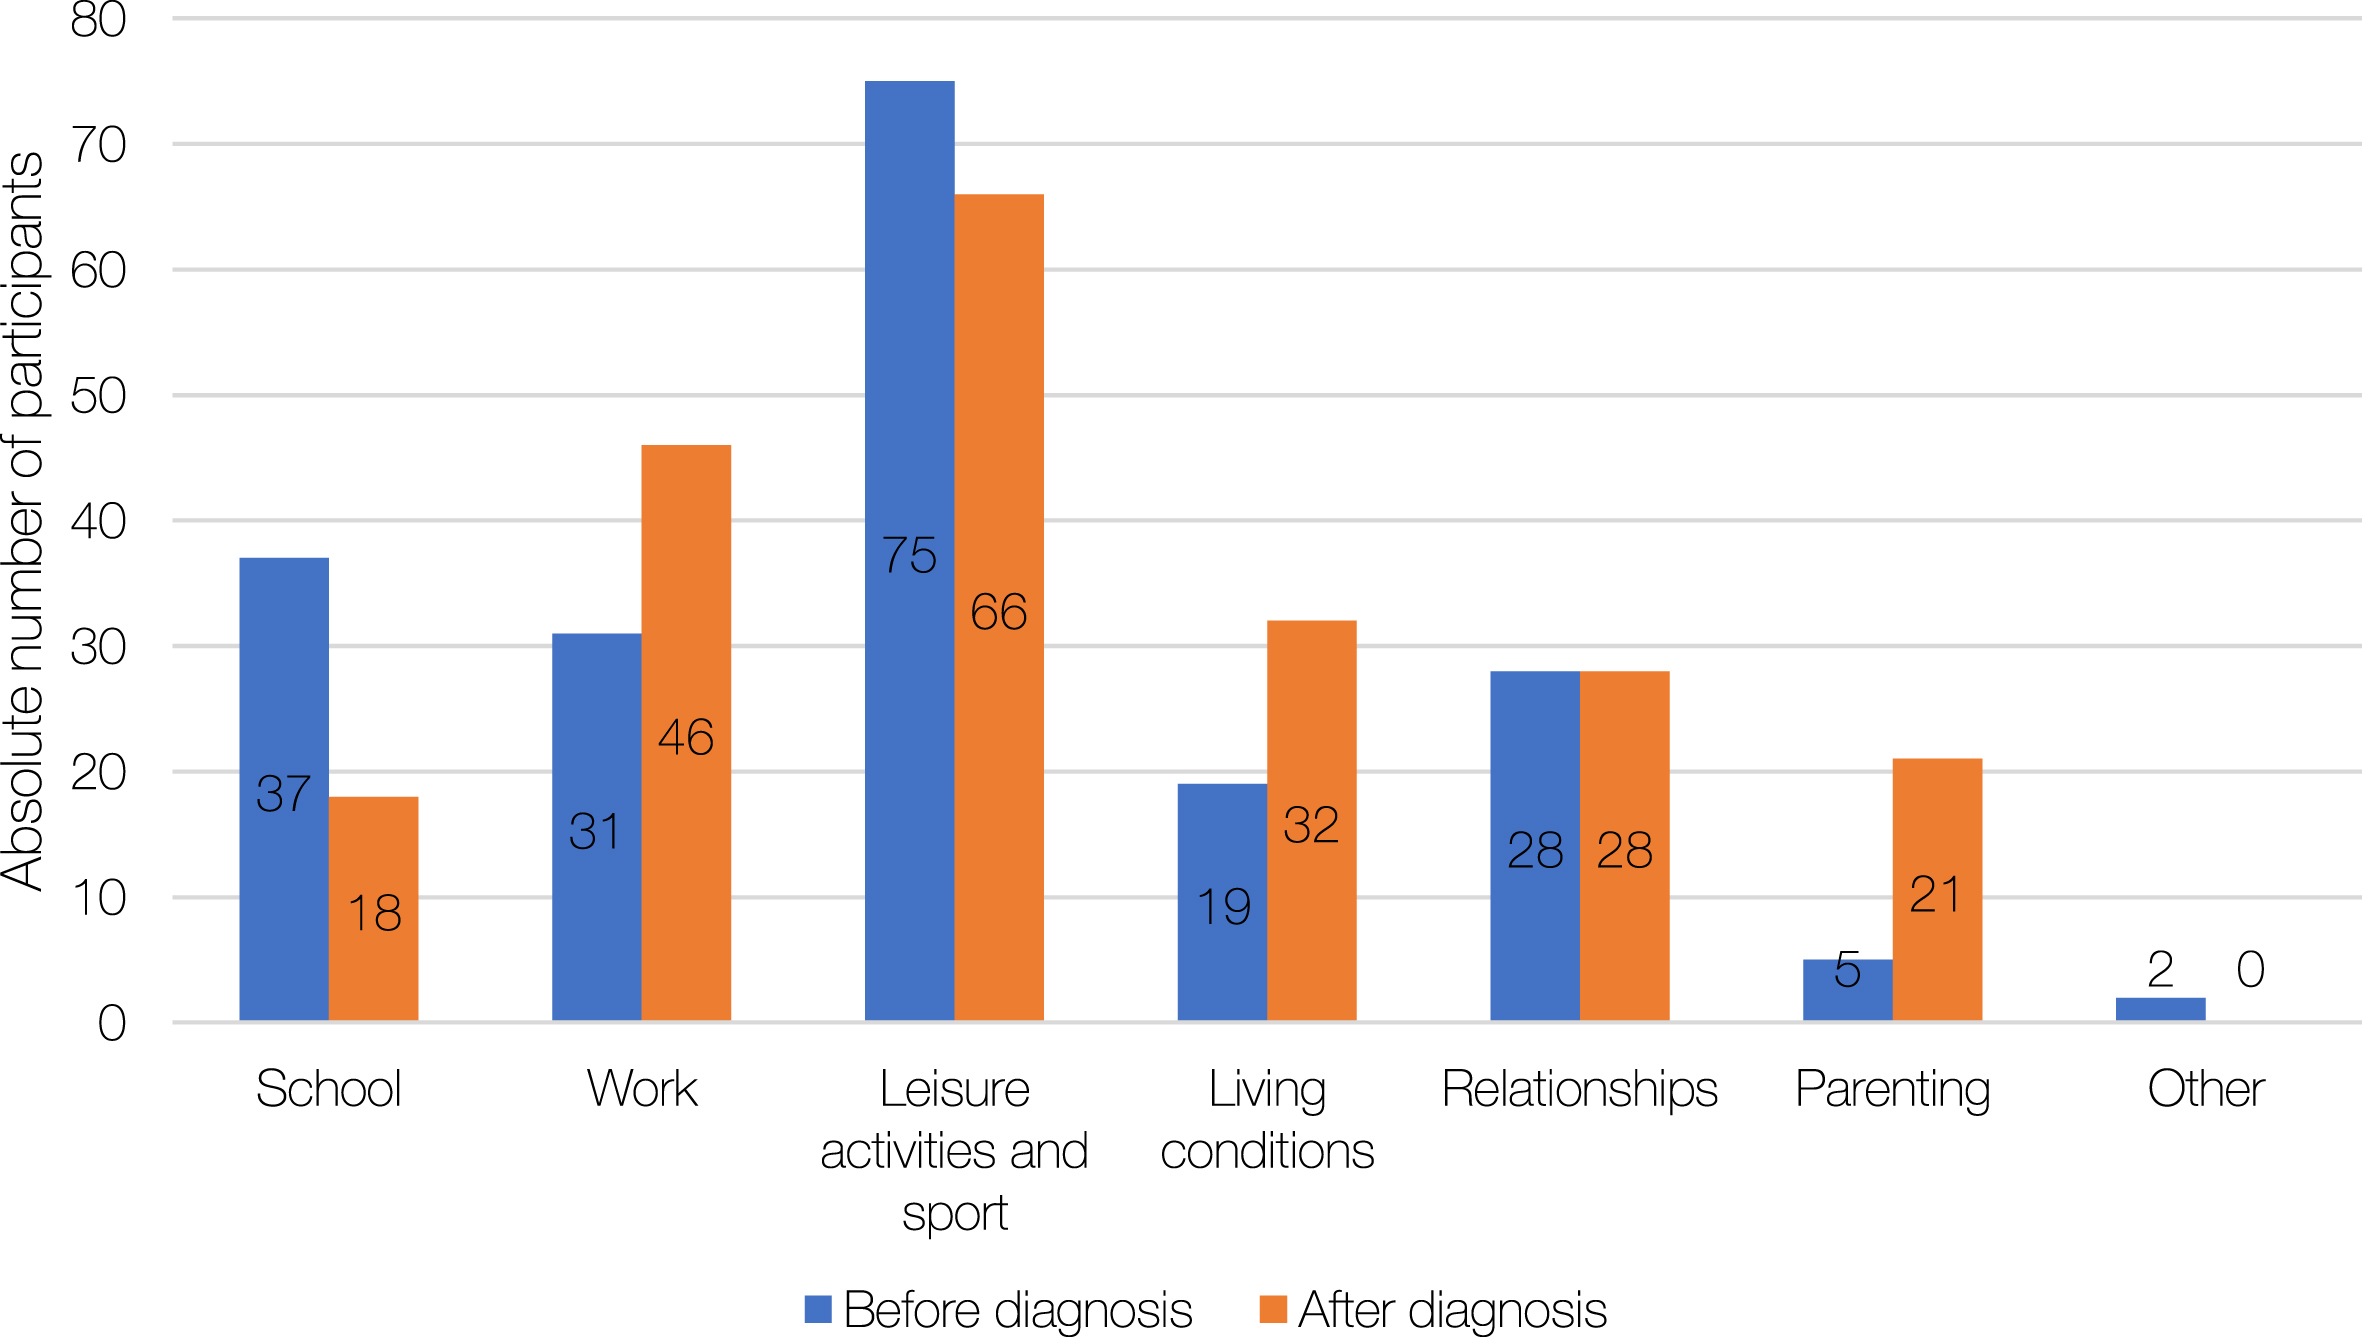 Effect of glycogen storage disease 5 (GSD5) diagnosis on life choices. Total respondents: n = 133.